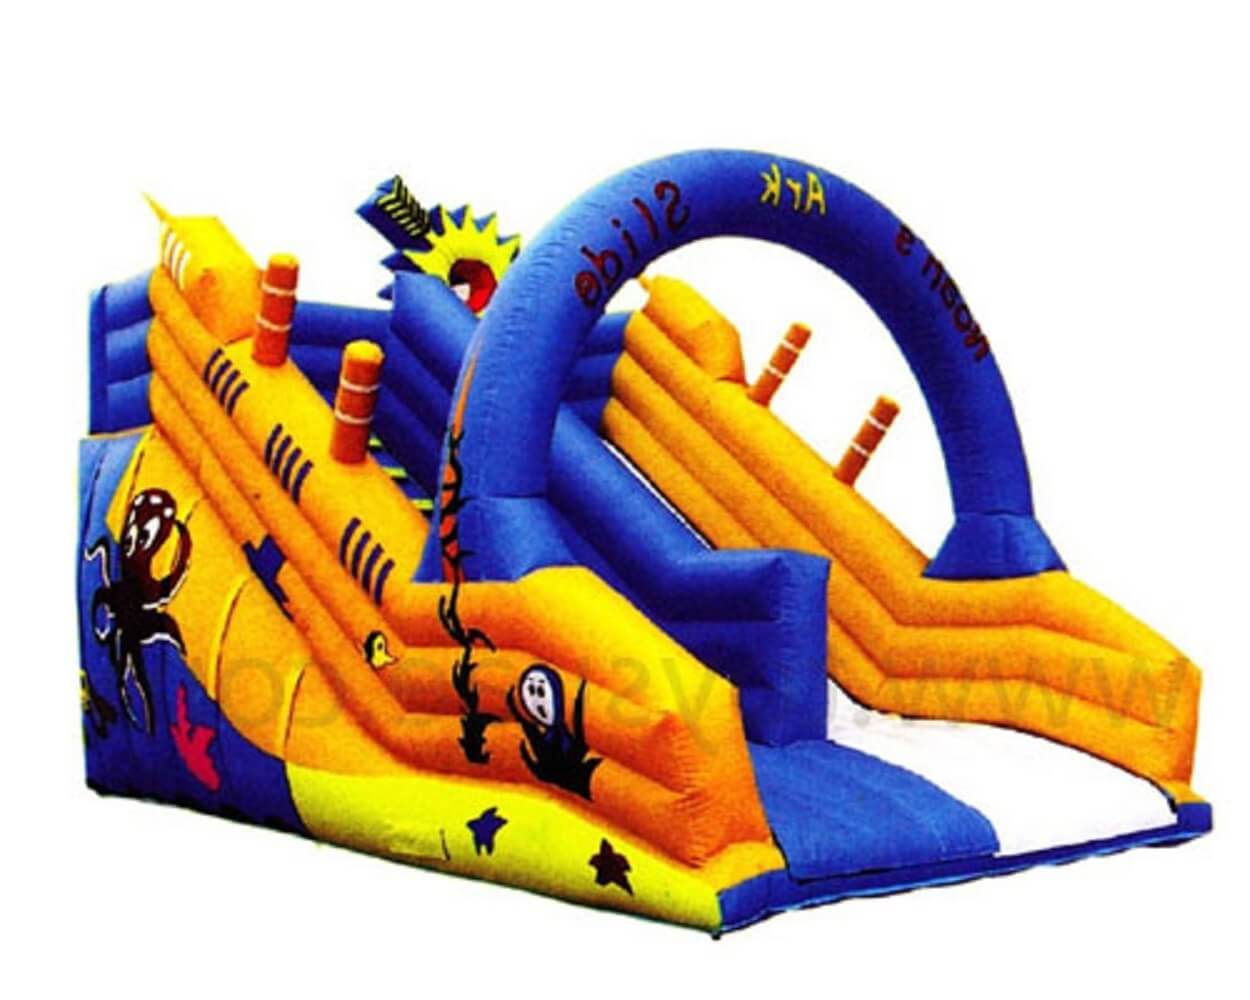 Raf SeaWorld High Rise Inflatable  Bouncy Castle With Twin Slides - 6 x 4 x 4.8 mtr